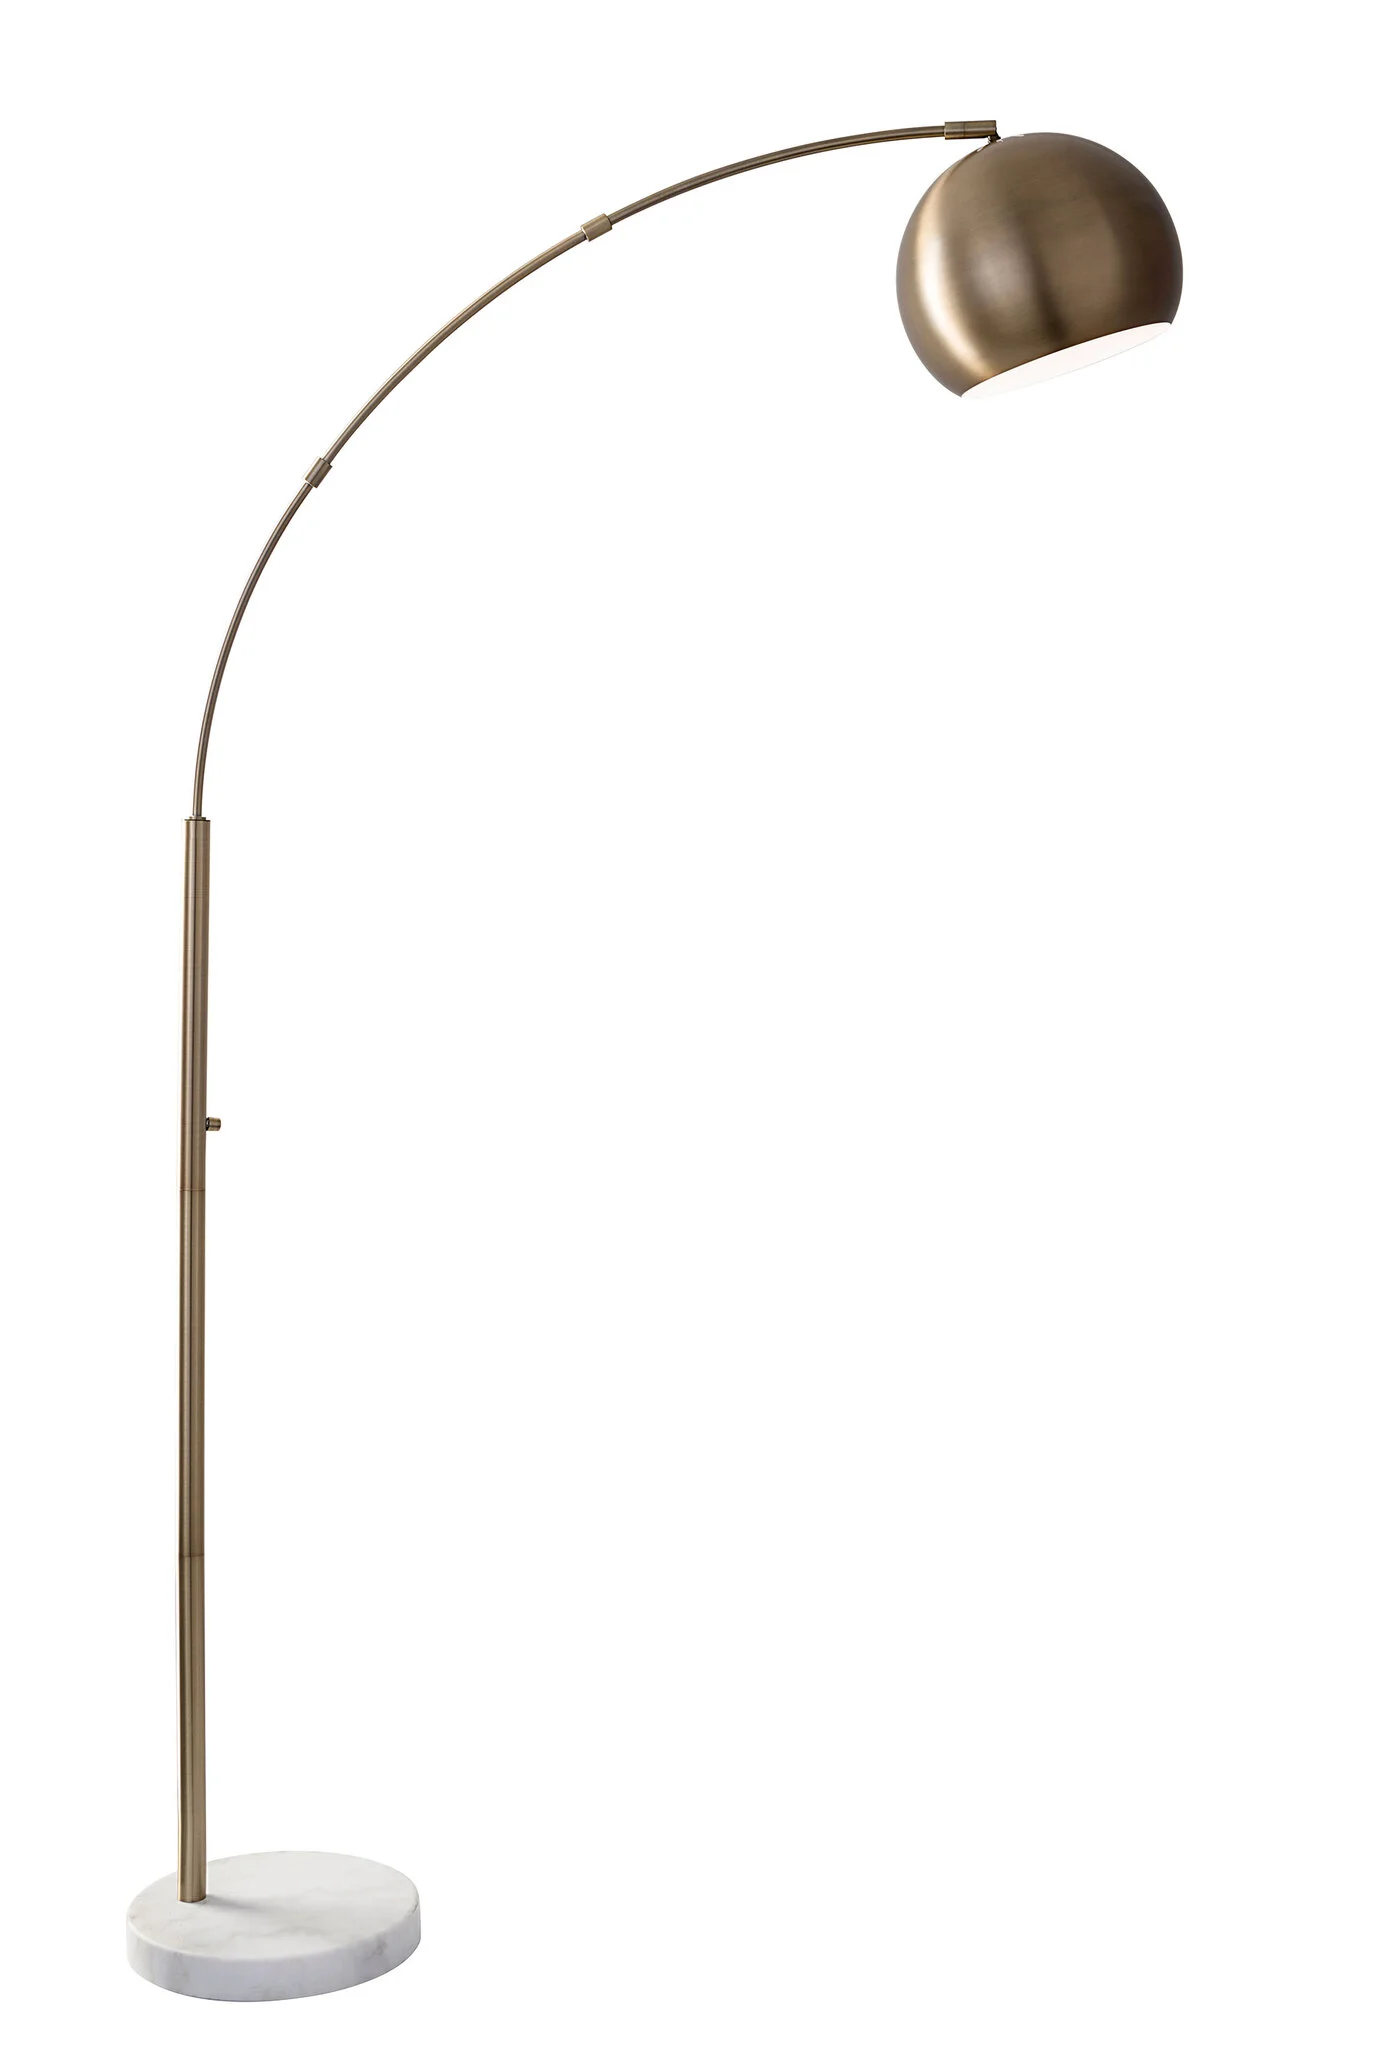 78" Brass Arc Floor Lamp With Brass Solid Color Bowl Shade-372754-1